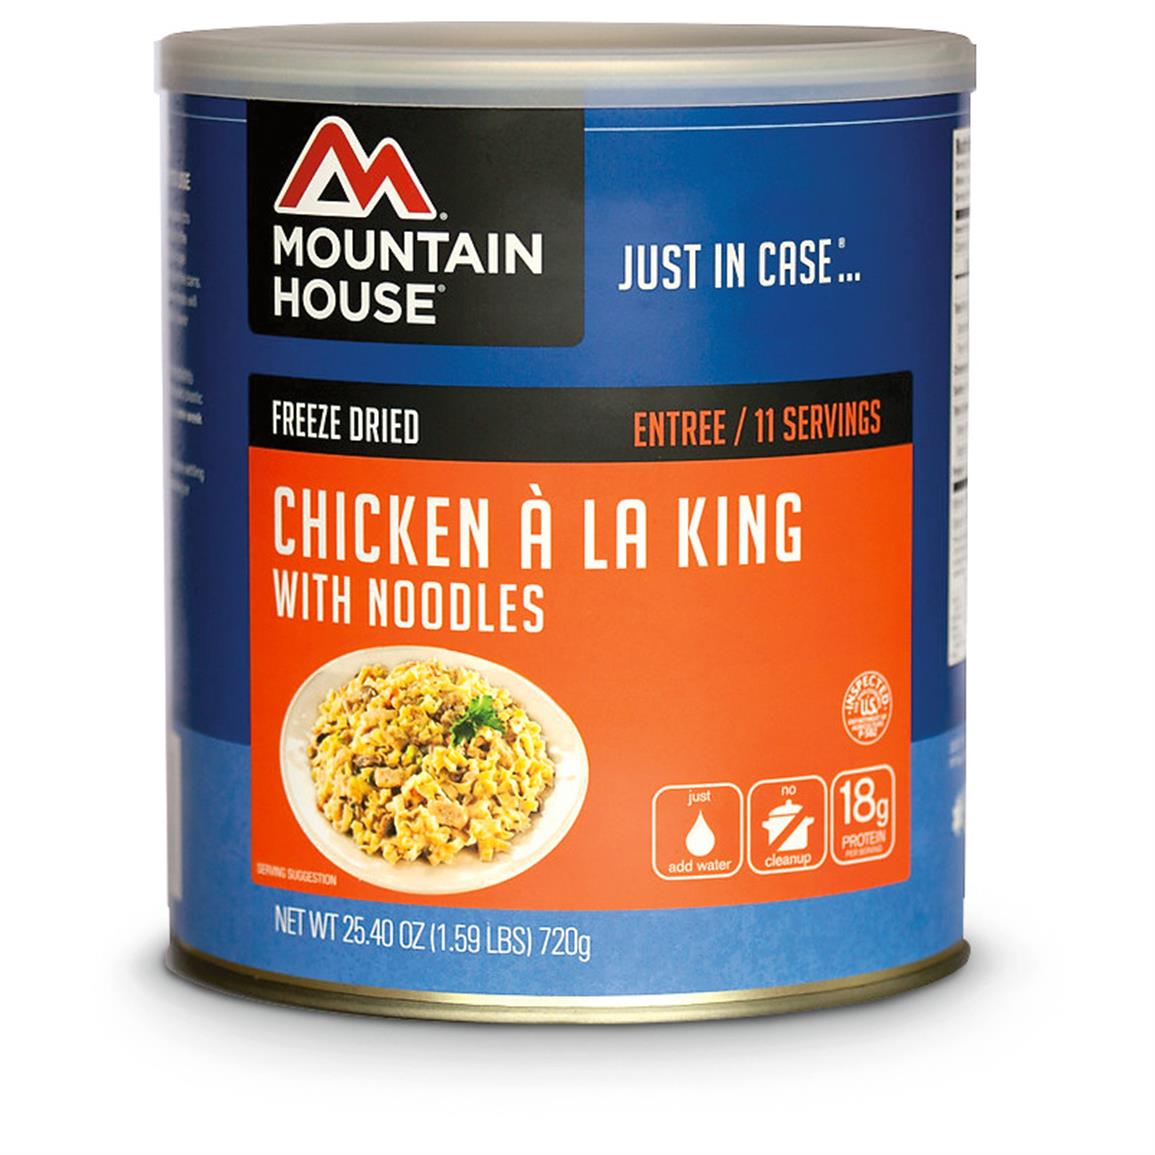 Mountain House Emergency Food Freeze&#8209Dried Chicken A La King with Noodles, 11 Servings